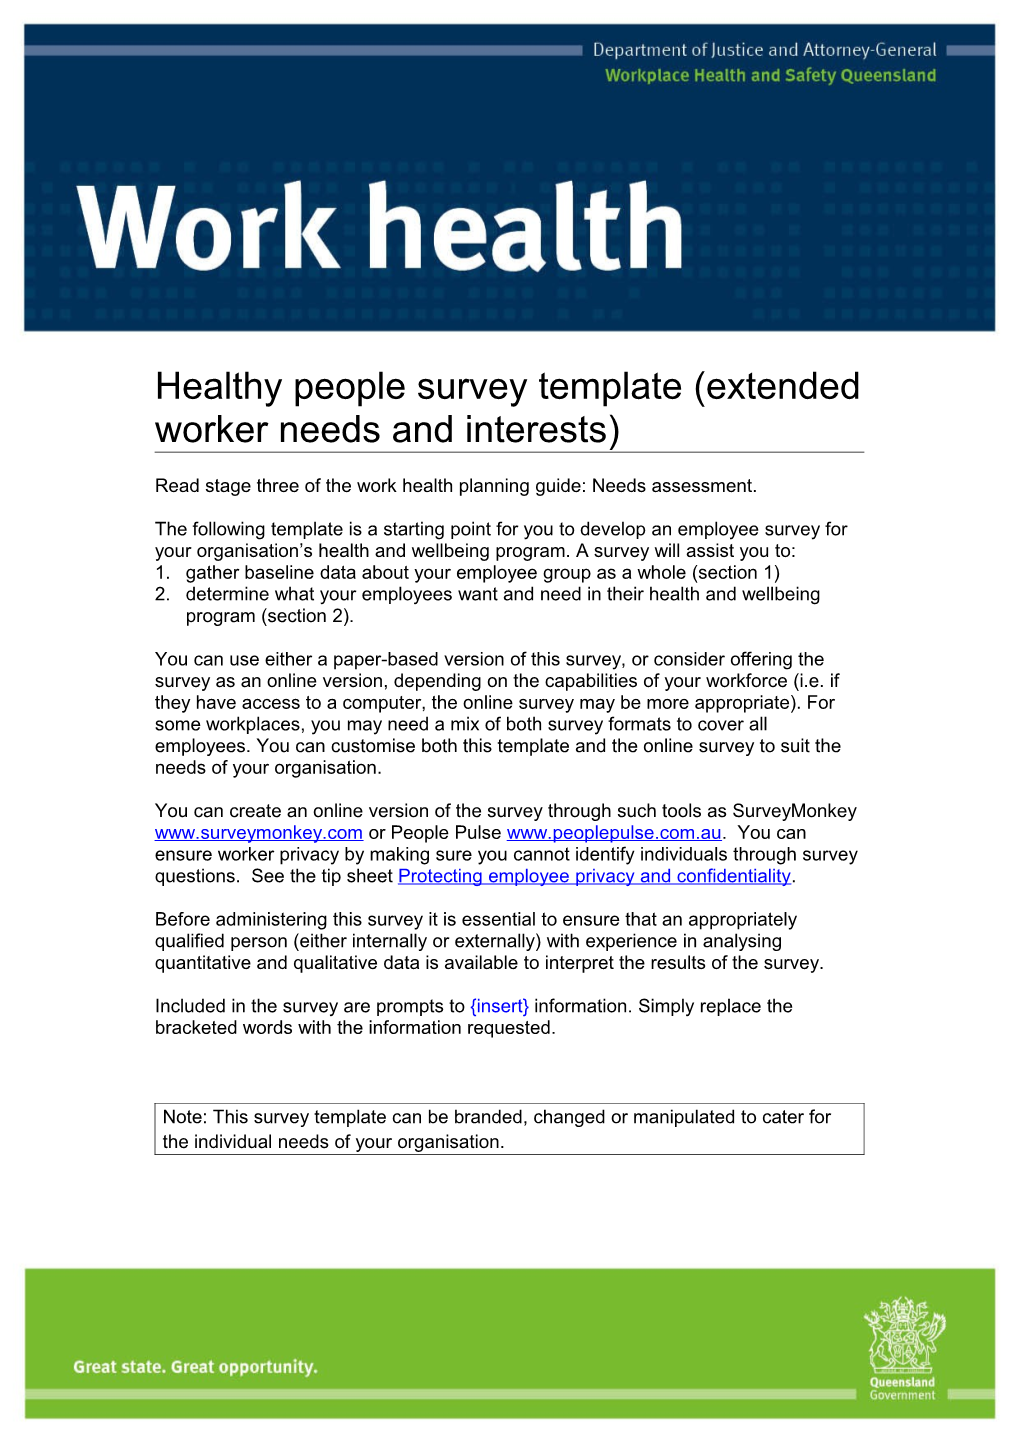 Extended Work Health Survey Tool for Worker Needs